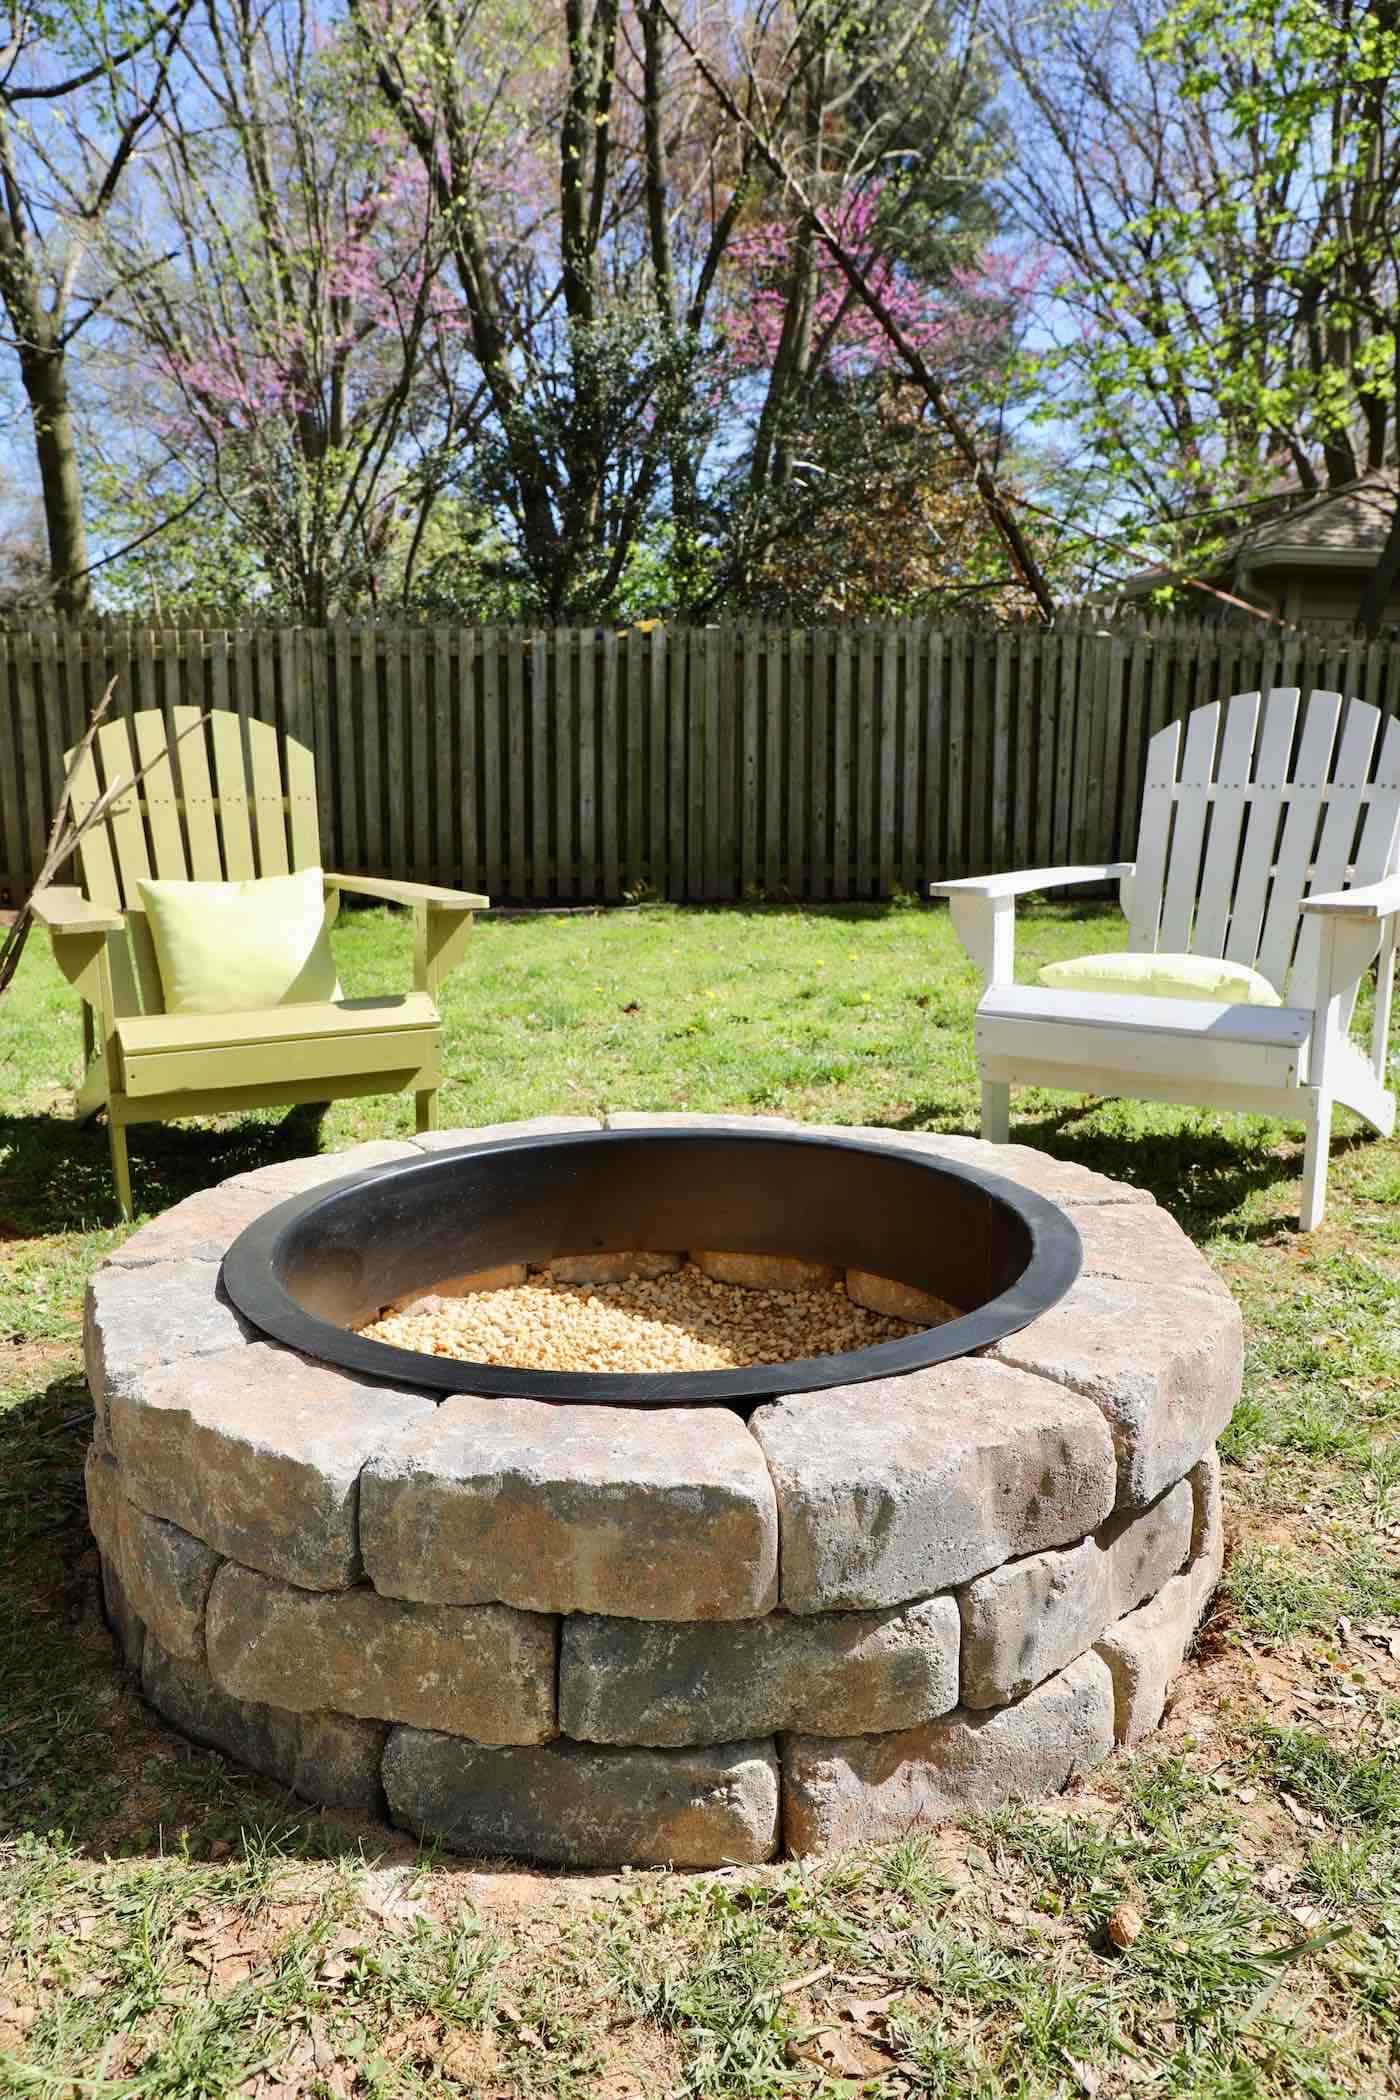 Diy Fire Pit With Gravel Stones, Do I Need A Screen On My Fire Pit